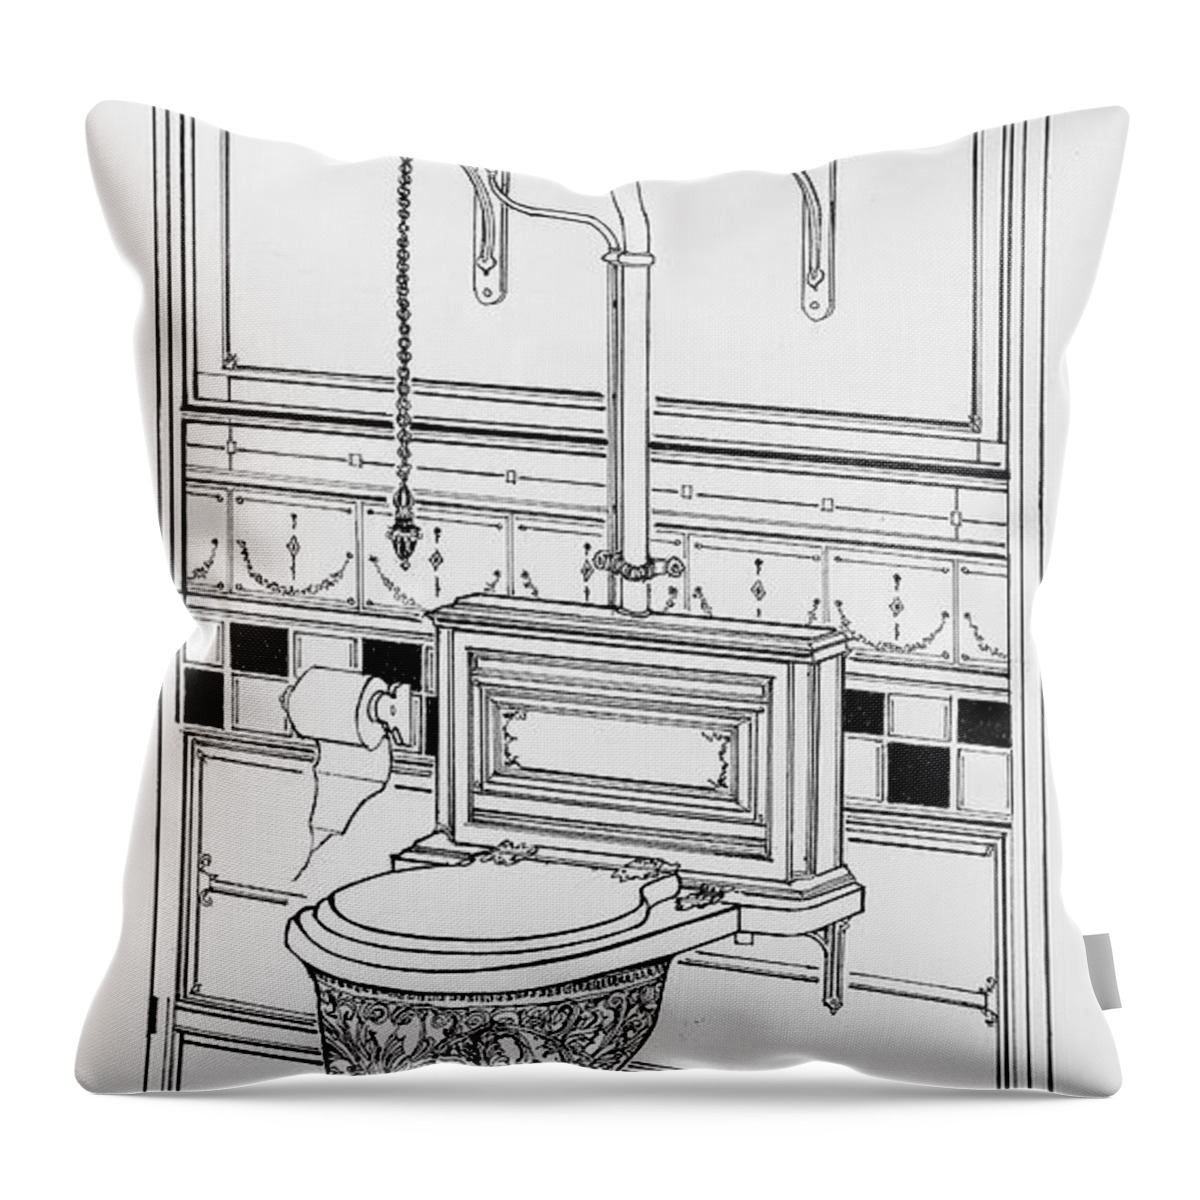 Victorian Potties Throw Pillow featuring the drawing Make A Joyful Noise #1 by Ira Shander